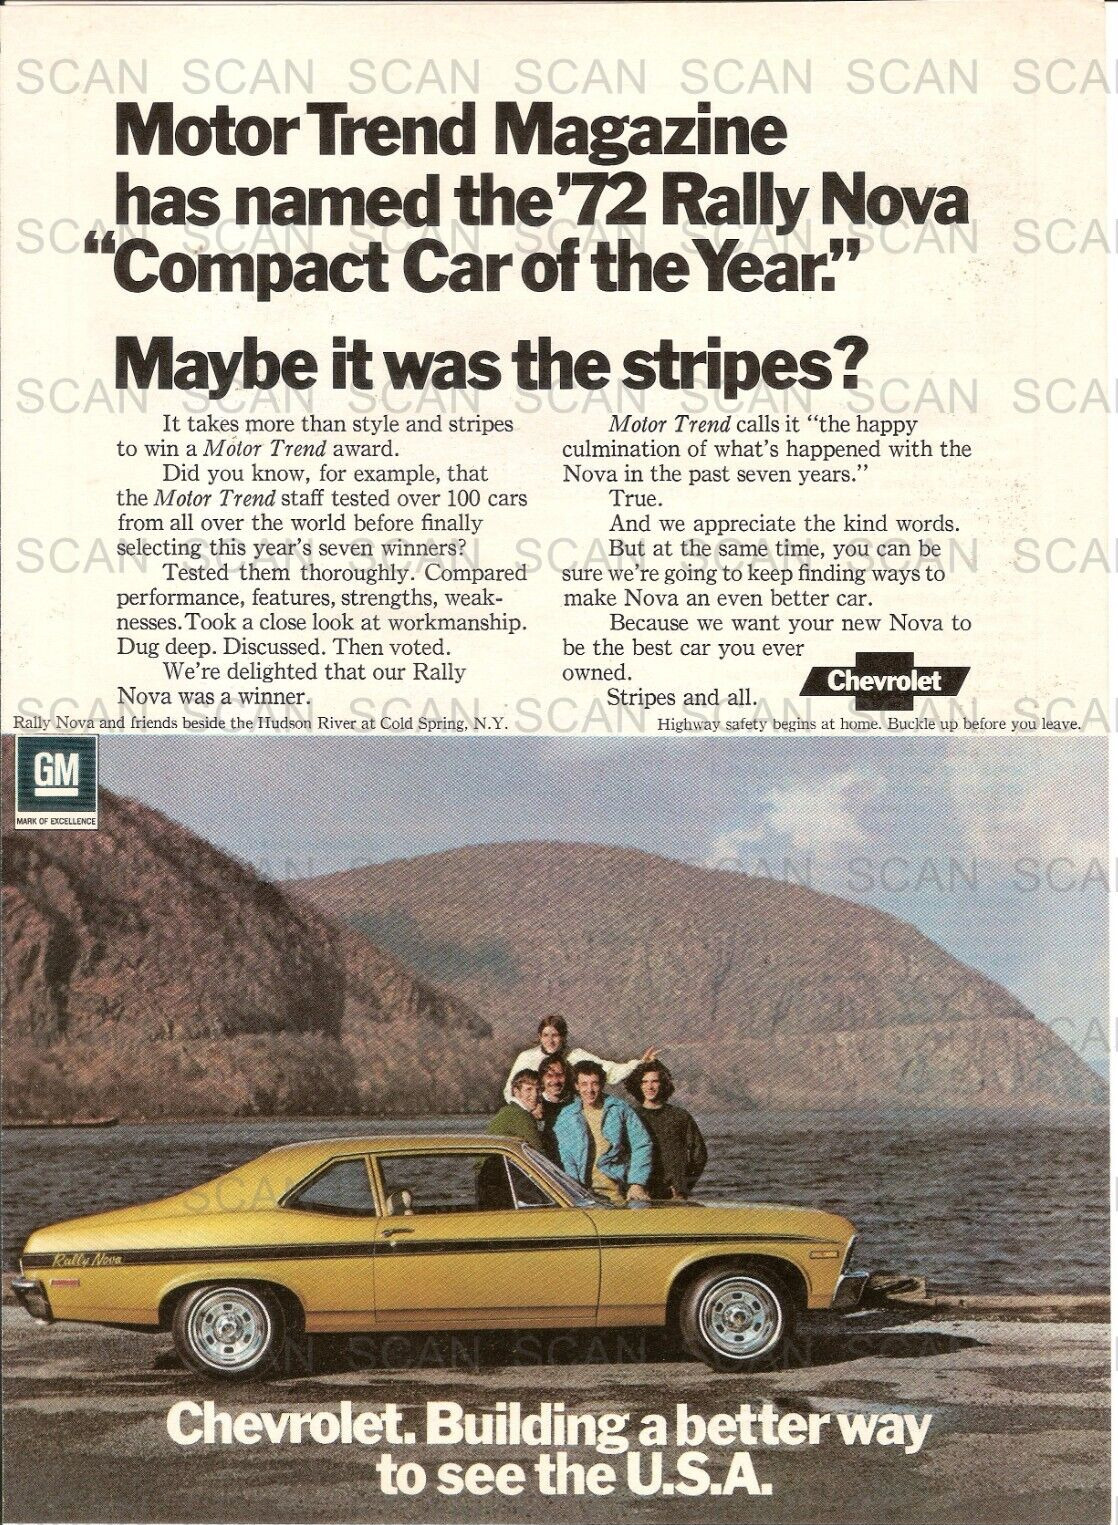 1972 Chevy Rally Nova Vintage Magazine Ad   Motor Trend Compact Car of the Year